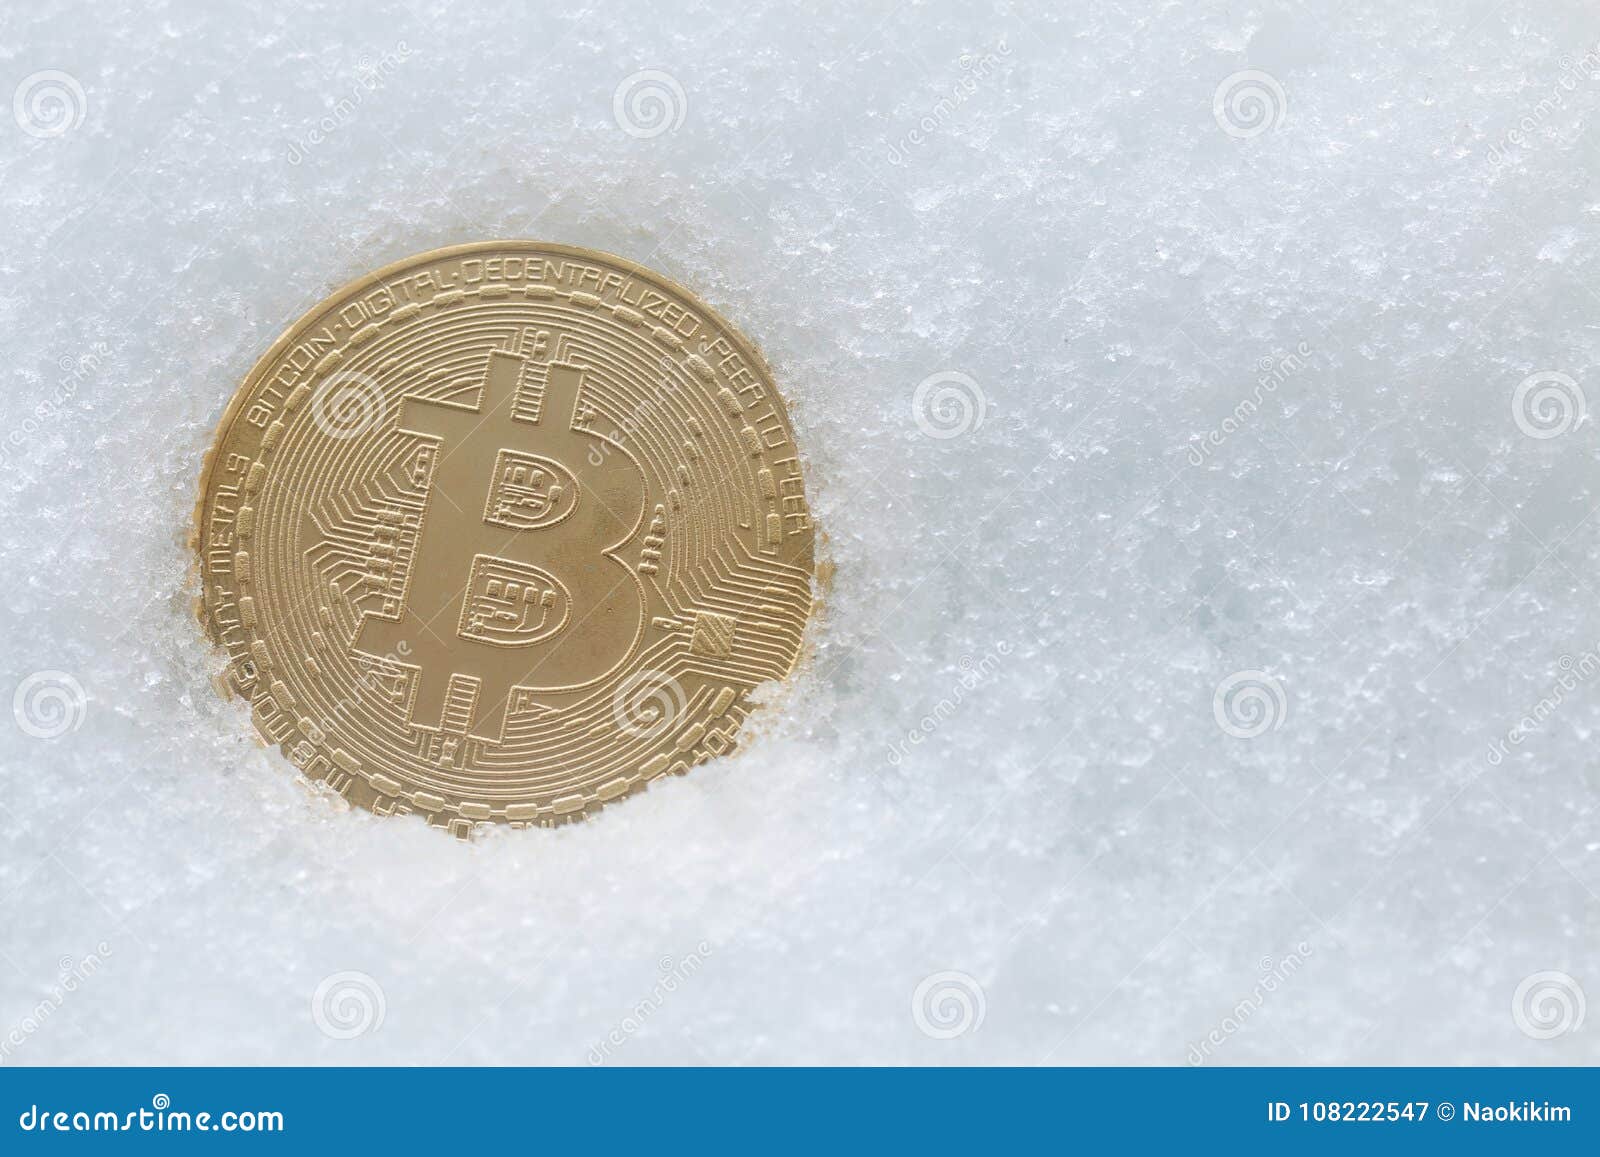 Gold Bitcoin On Cold Winter Snow Background Stock Image ...